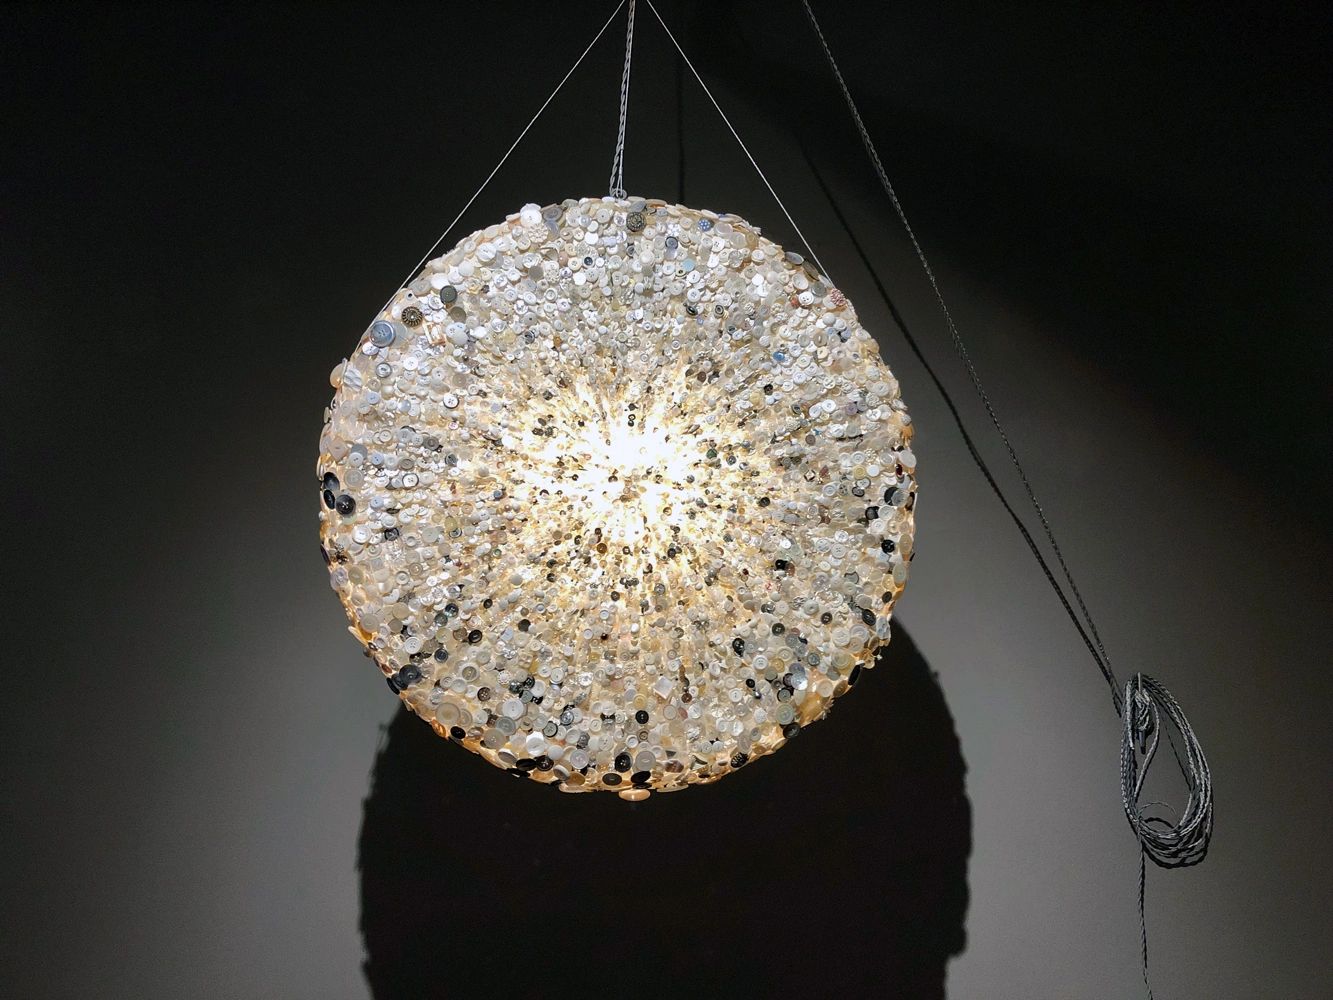 Bouton sculpture made from buttons, jewelry, and light